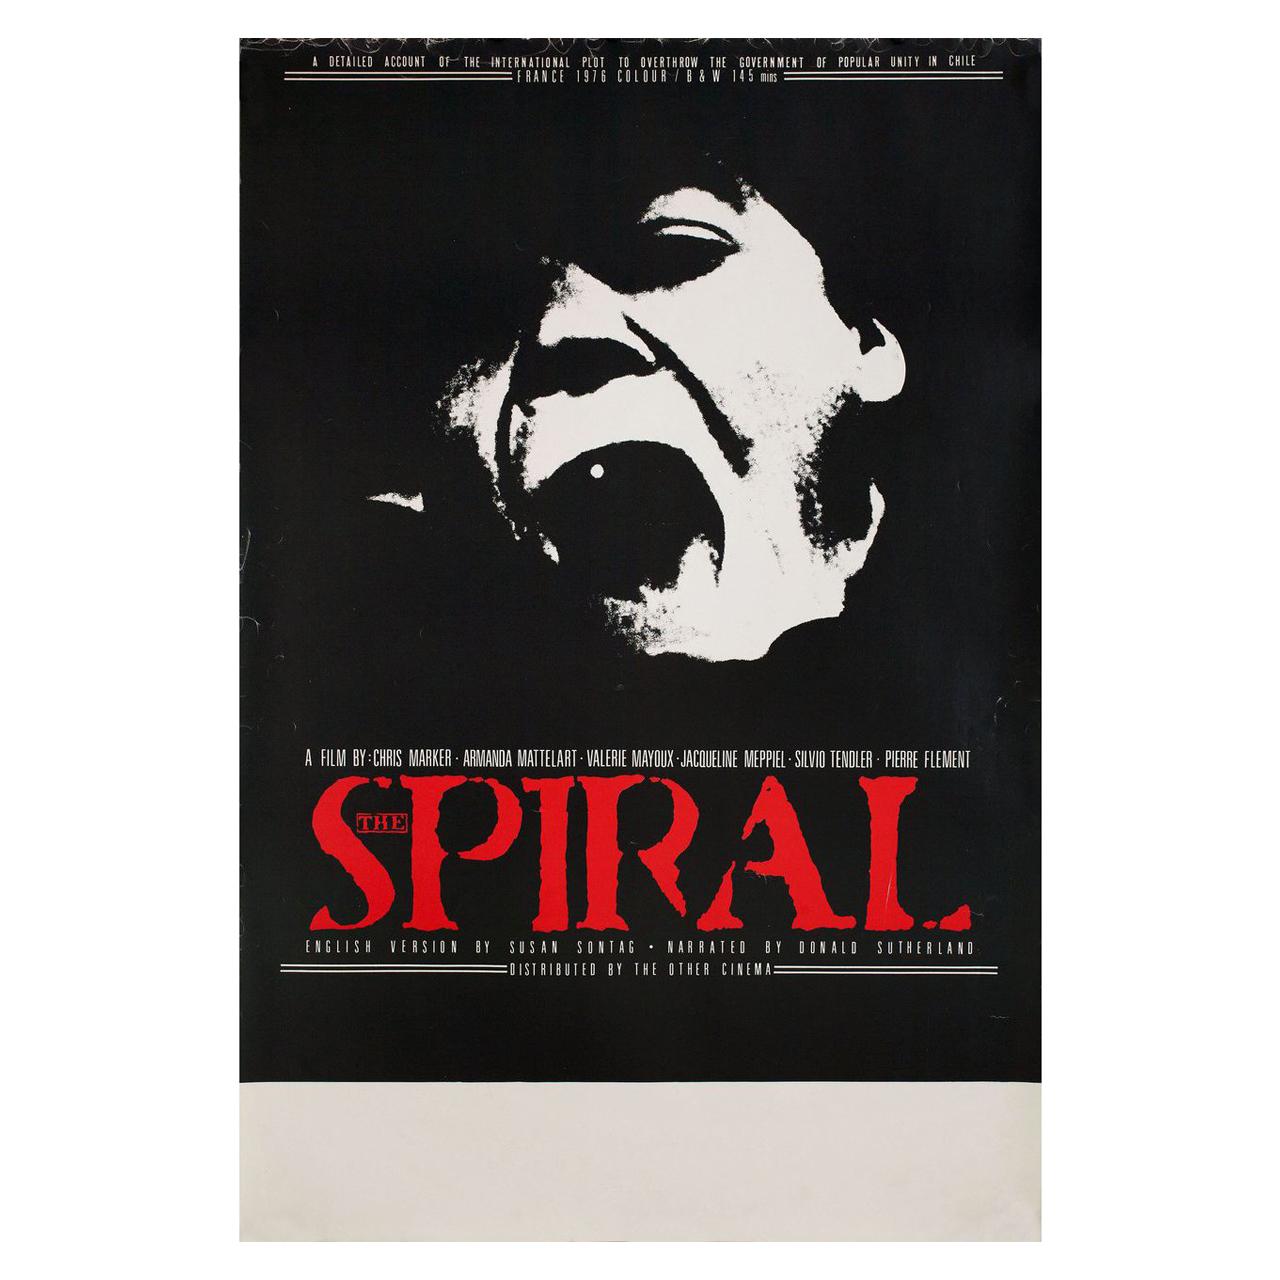 The Spiral 1976 British Double Crown Film Poster